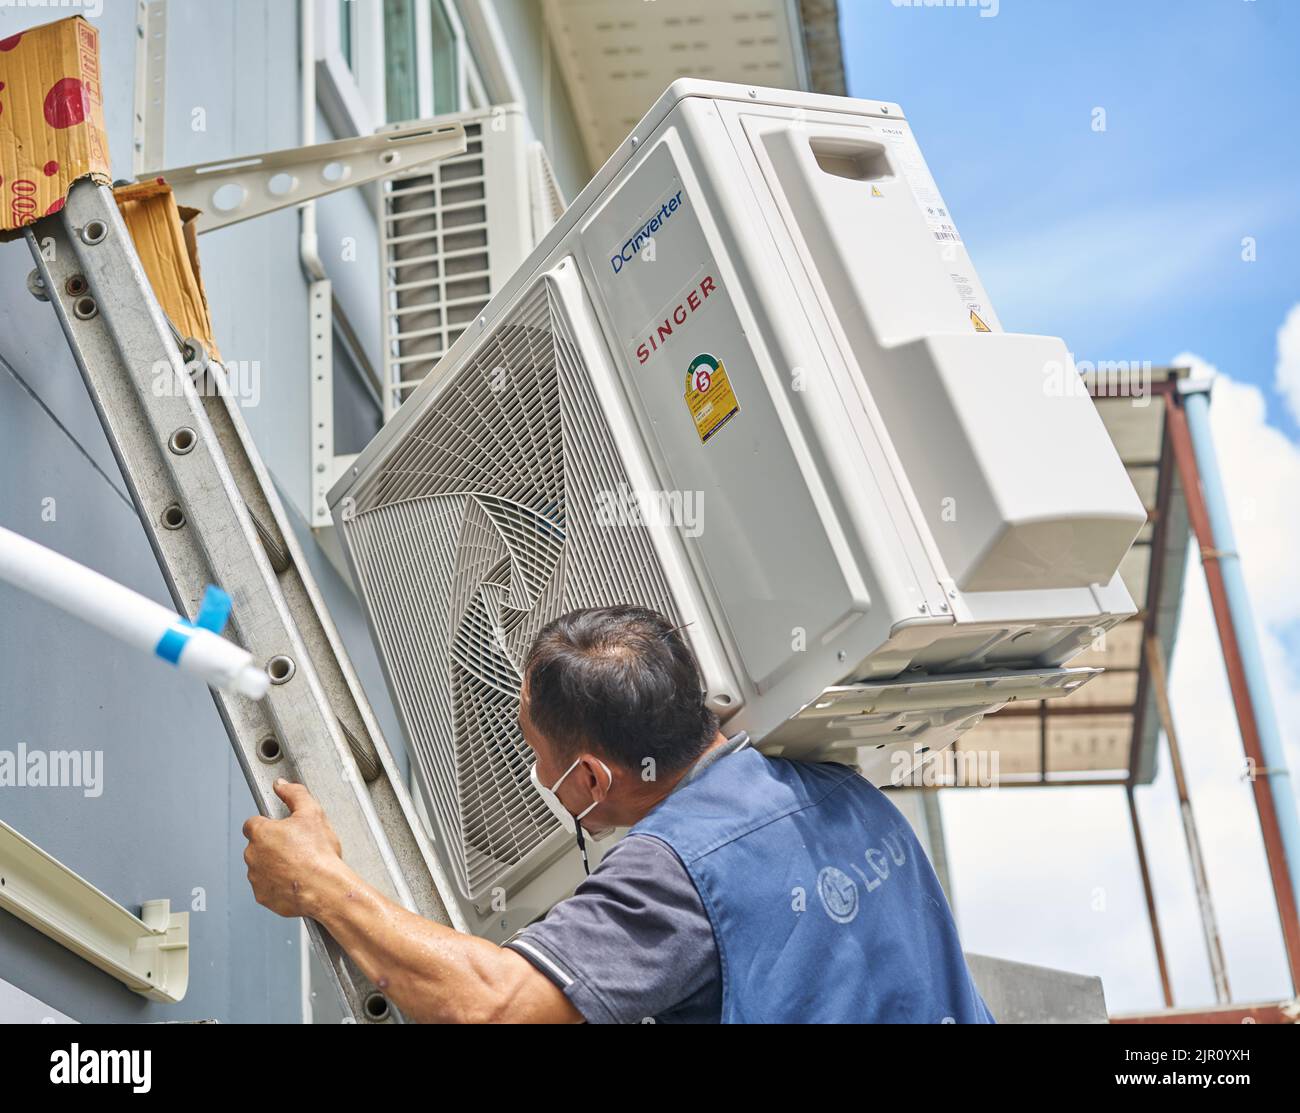 A man carries a heavy air conditioner compressor on his shoulder while climbing a ladder. Stock Photo